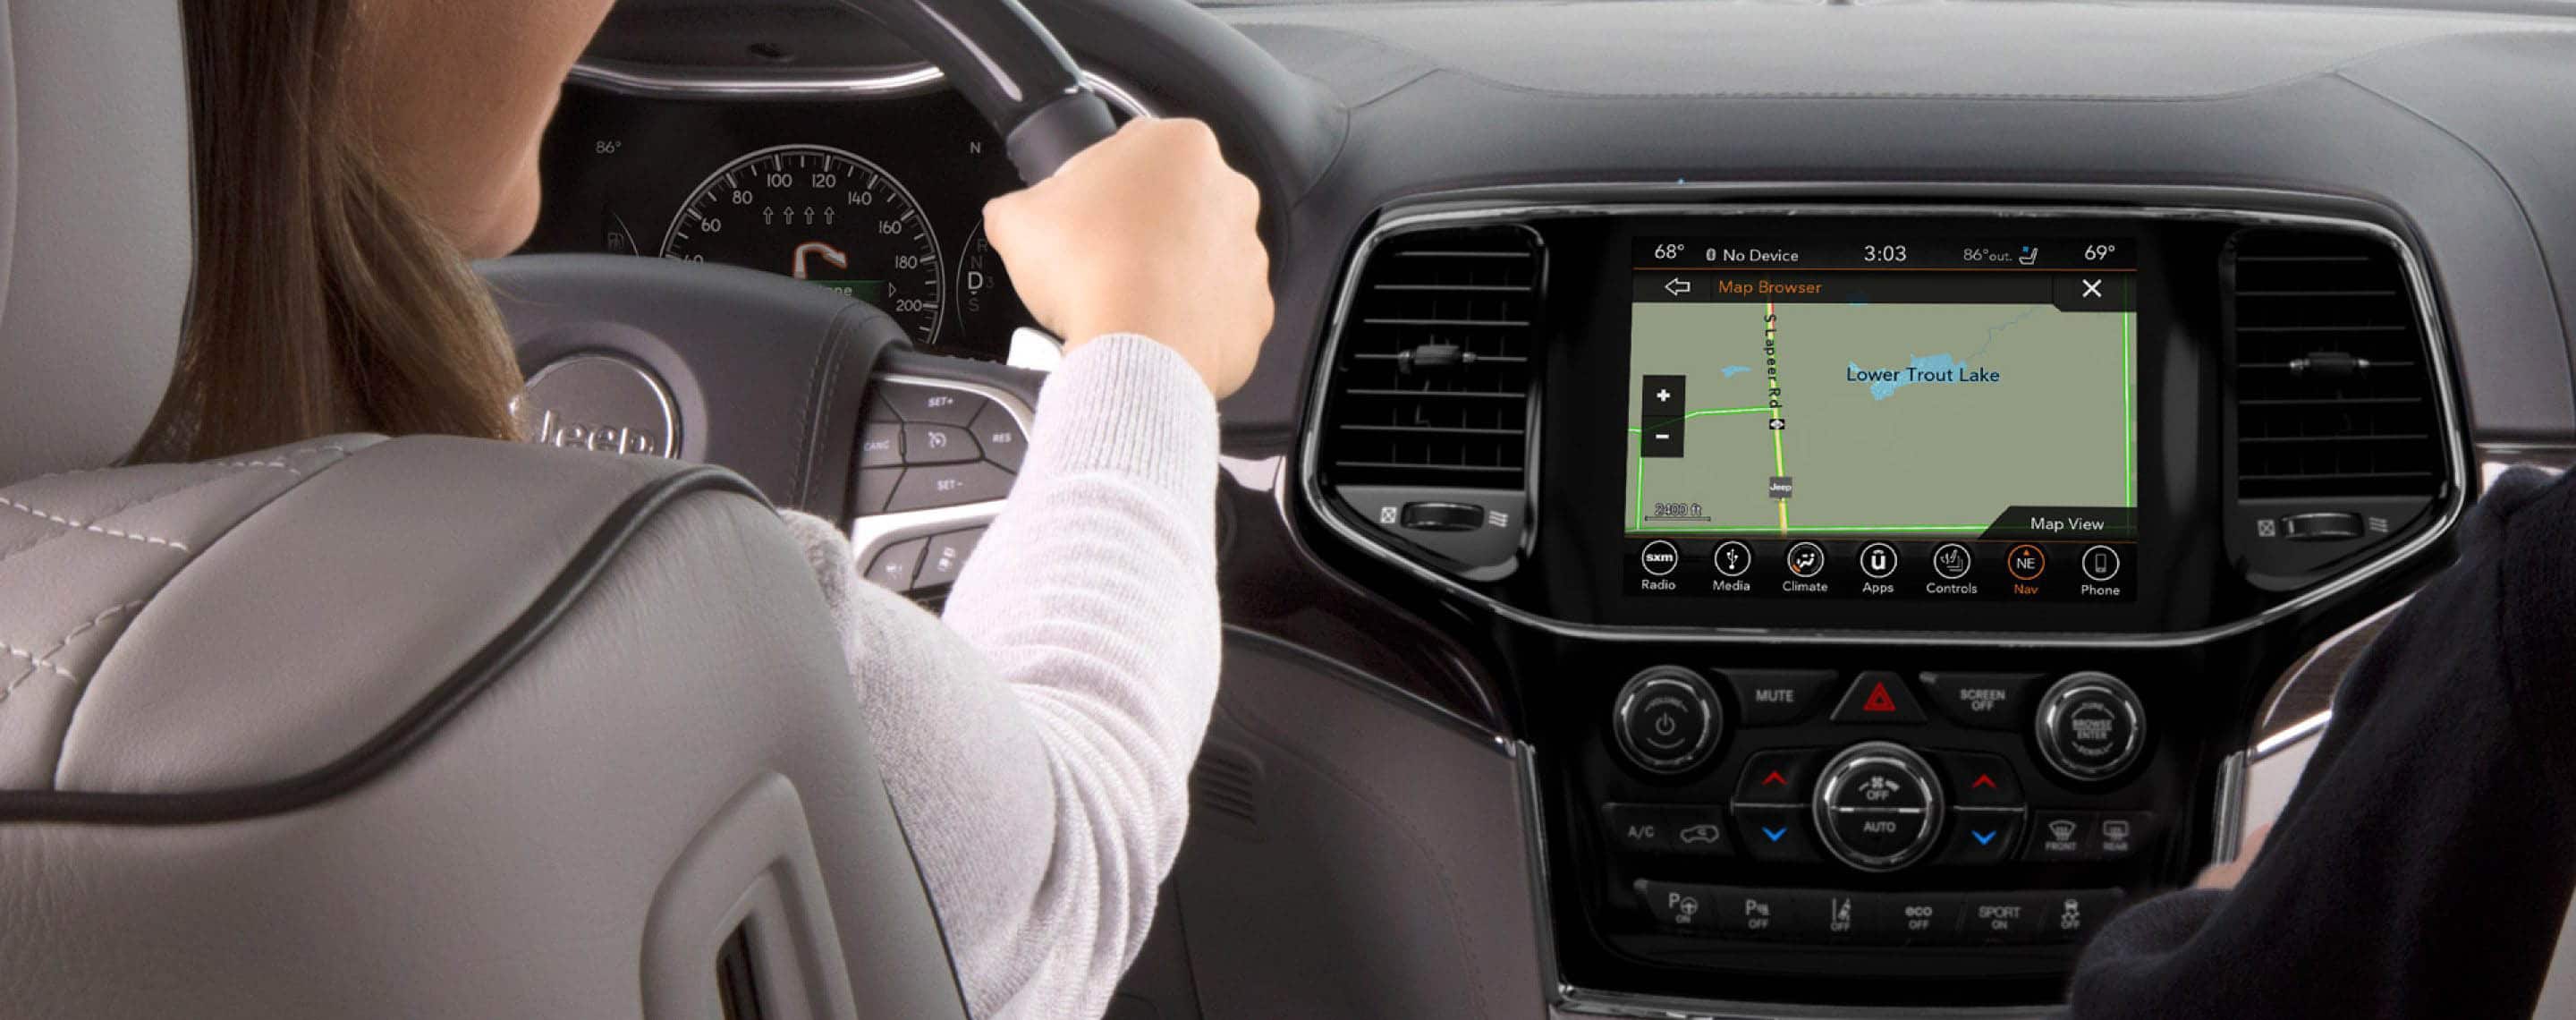 Uconnect - Jeep® Uconnect System Navigation Features